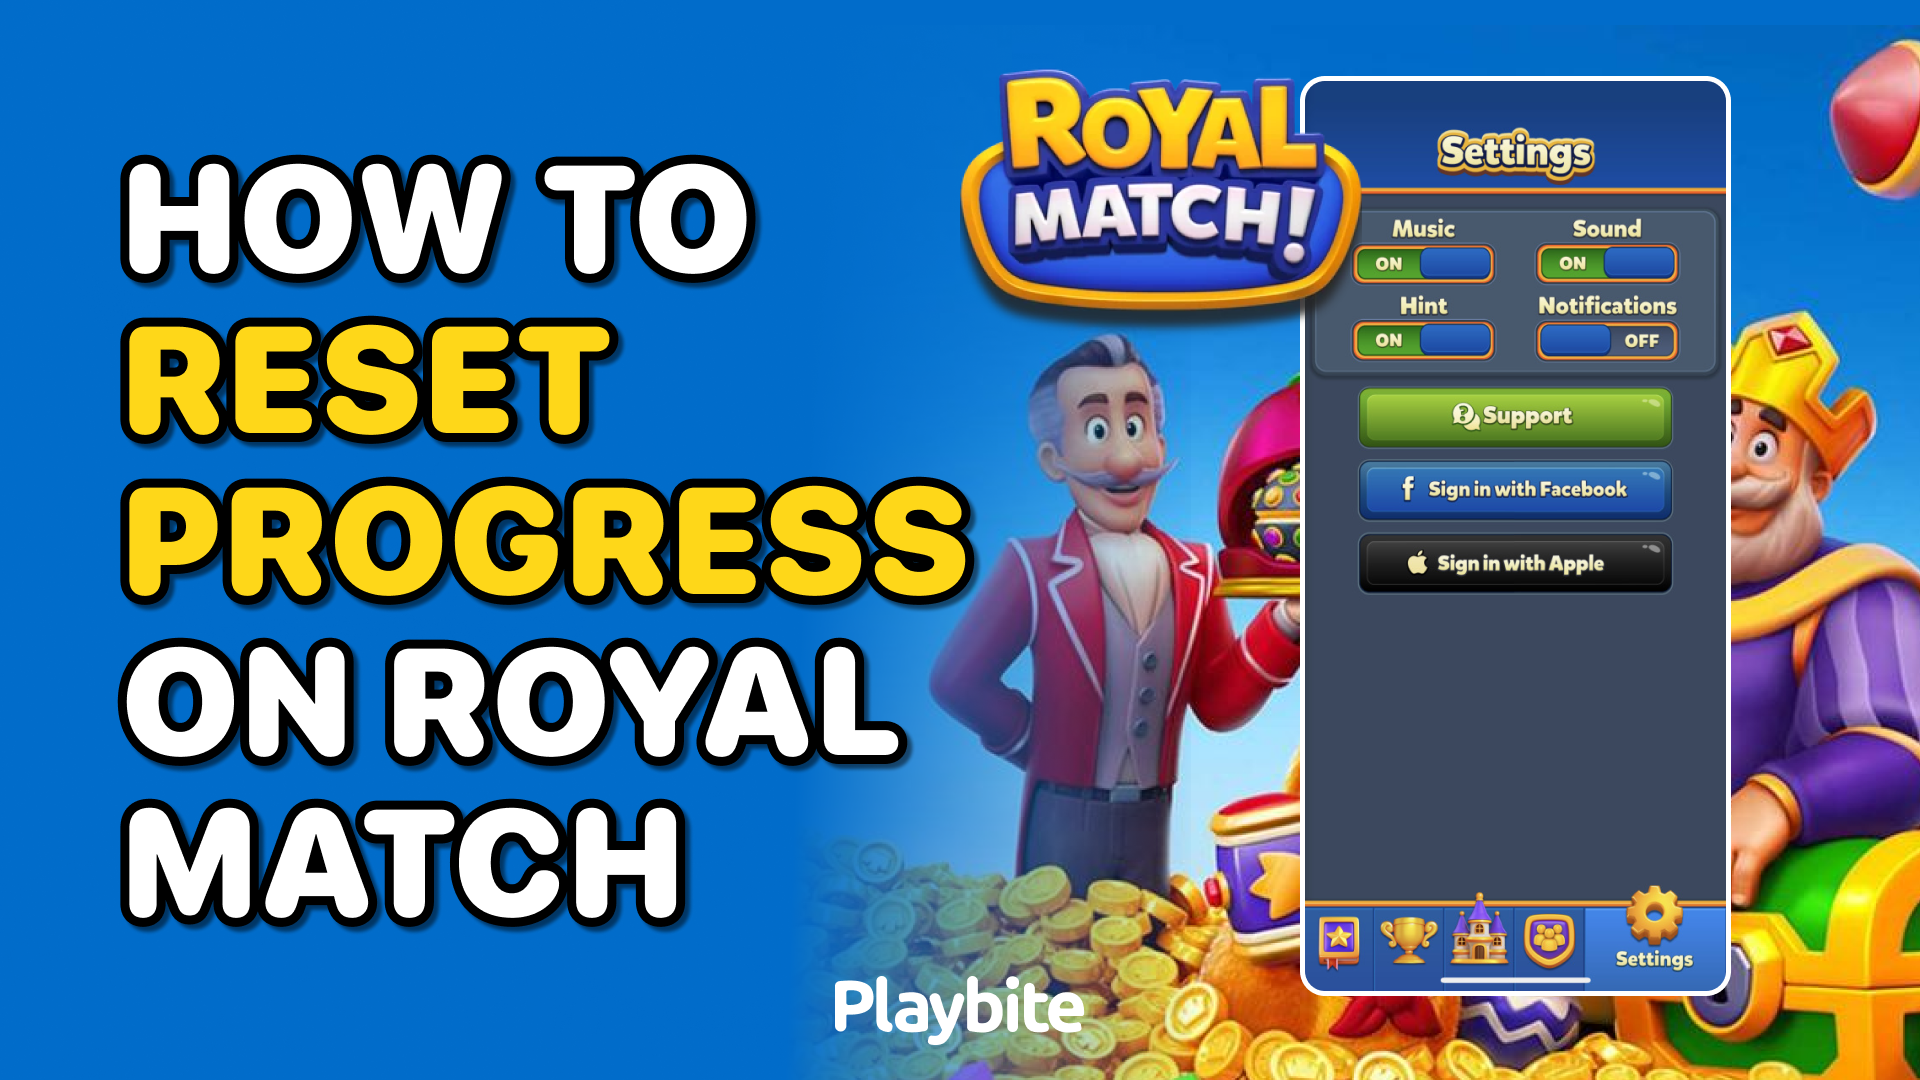 How to Reset Progress on Royal Match